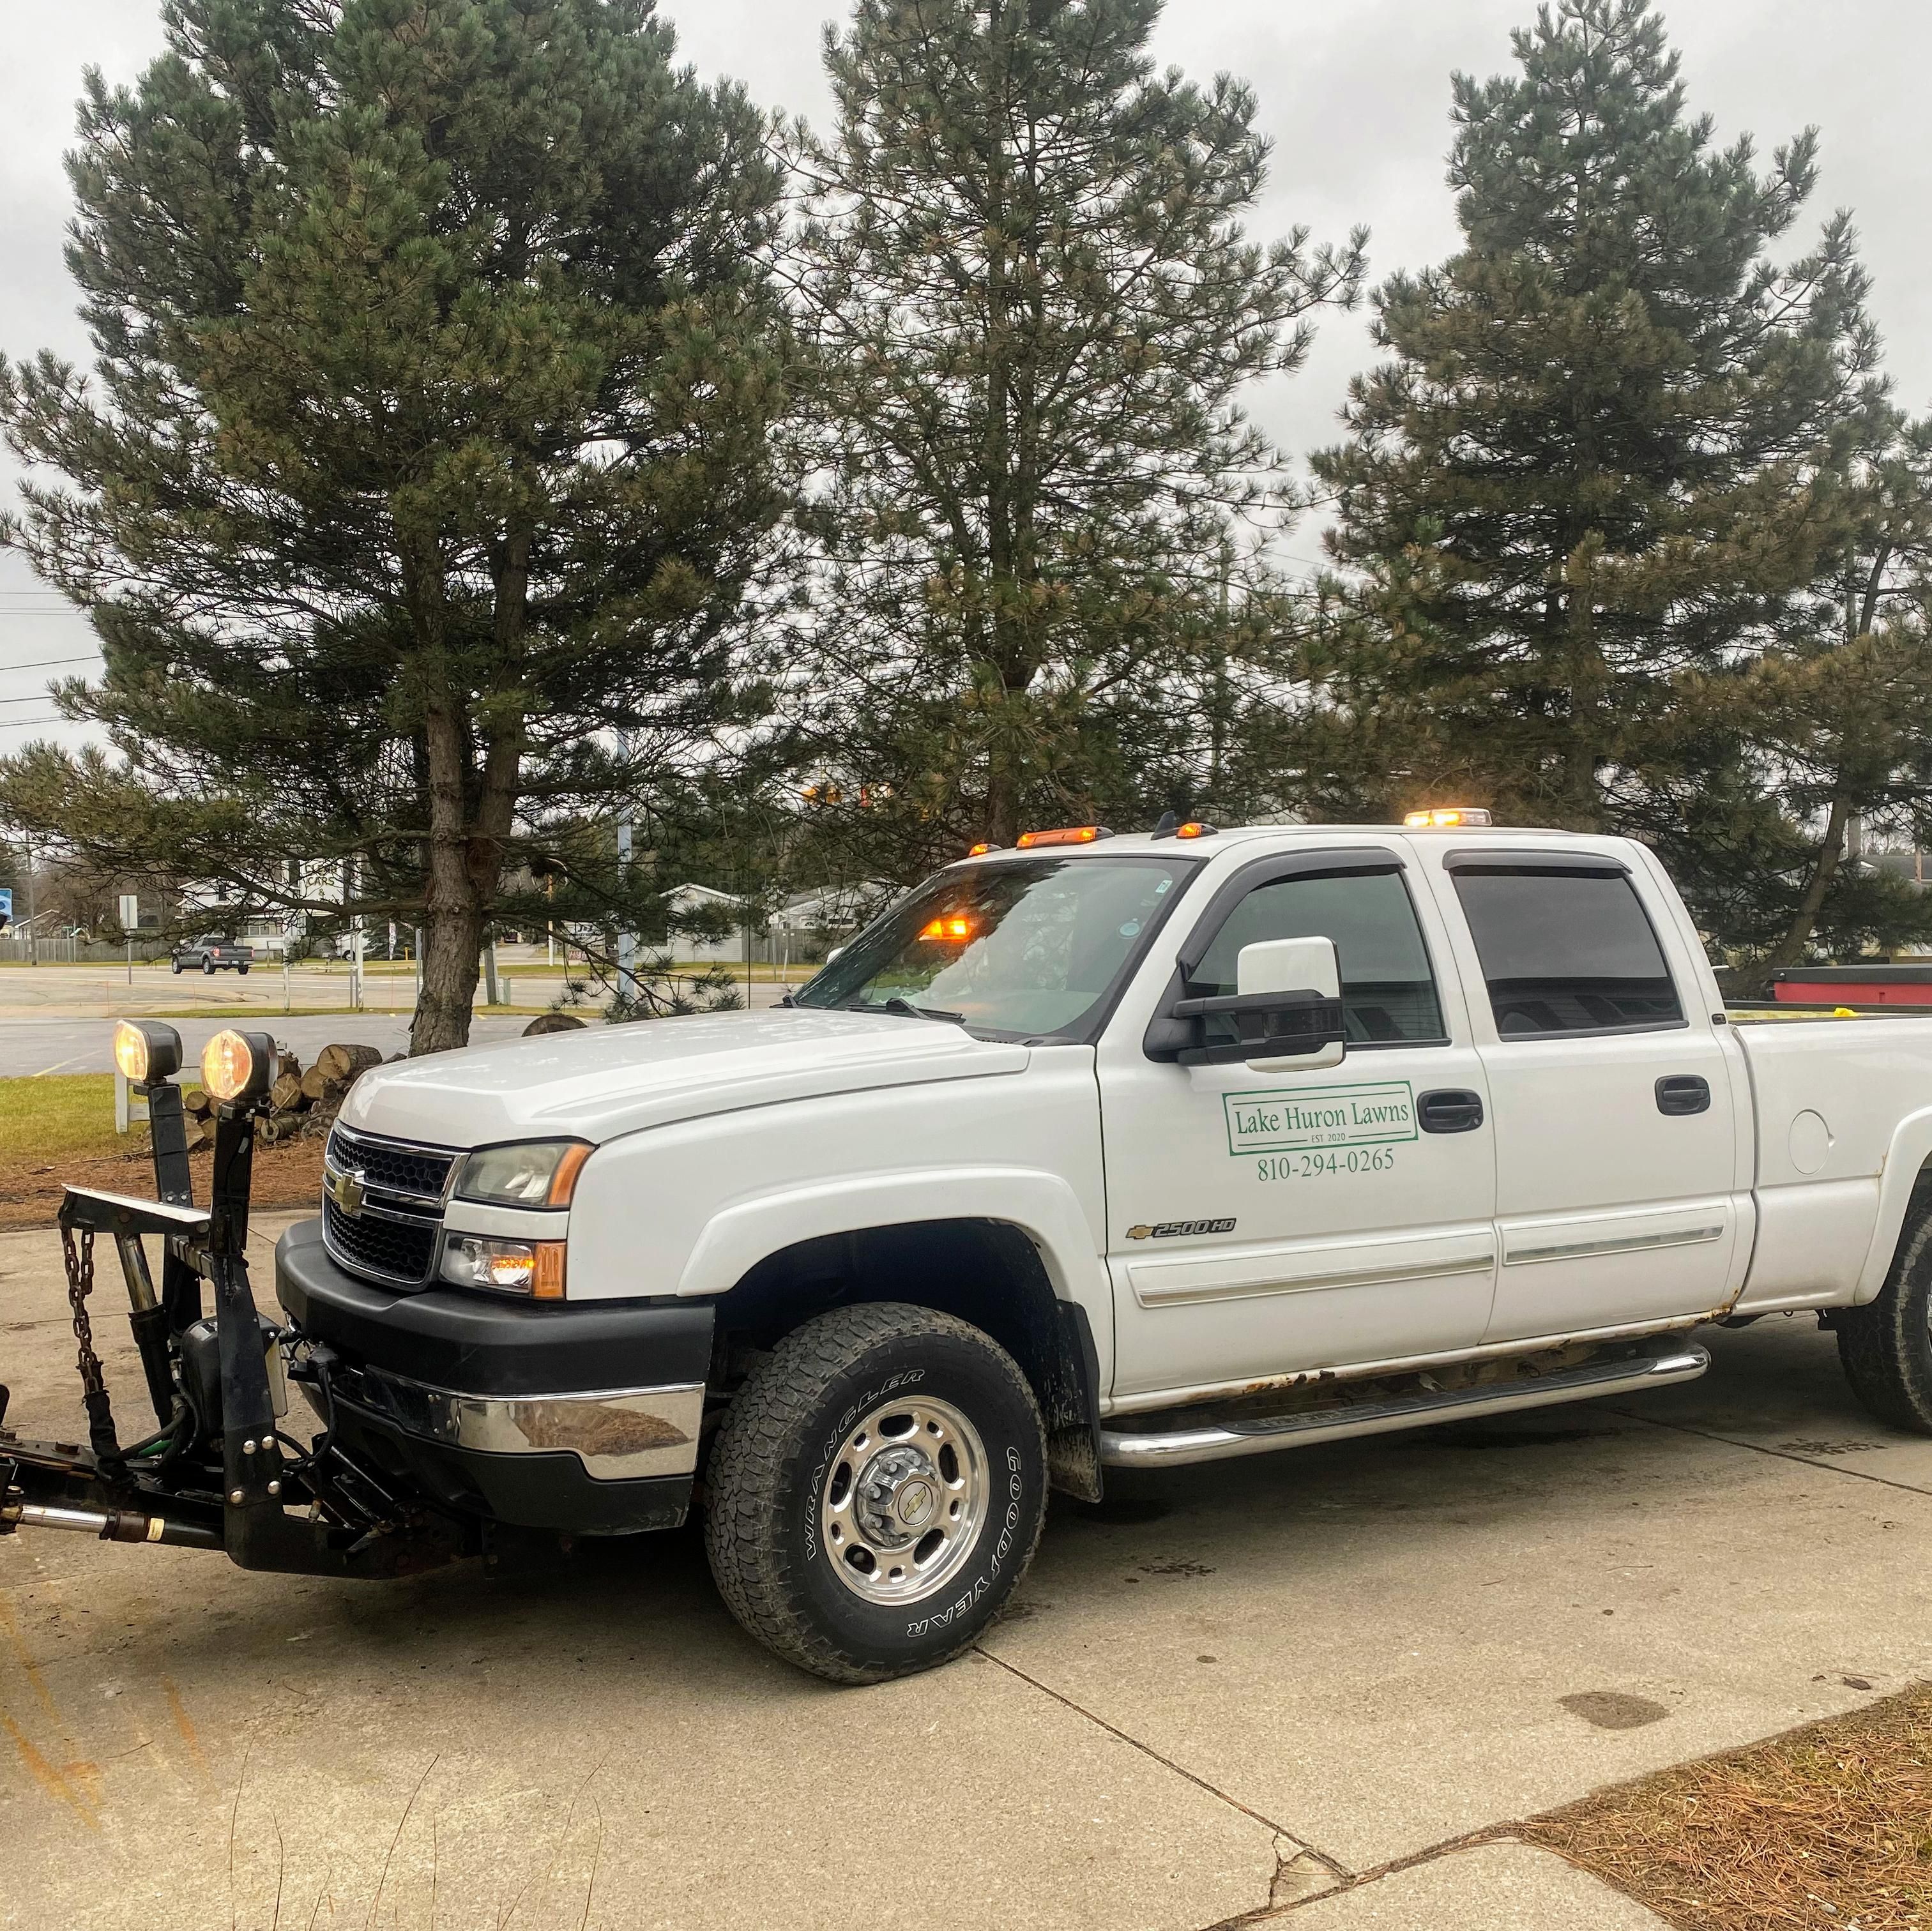 Spring and Fall Clean Ups for Lake Huron Lawns in Lexington, MI